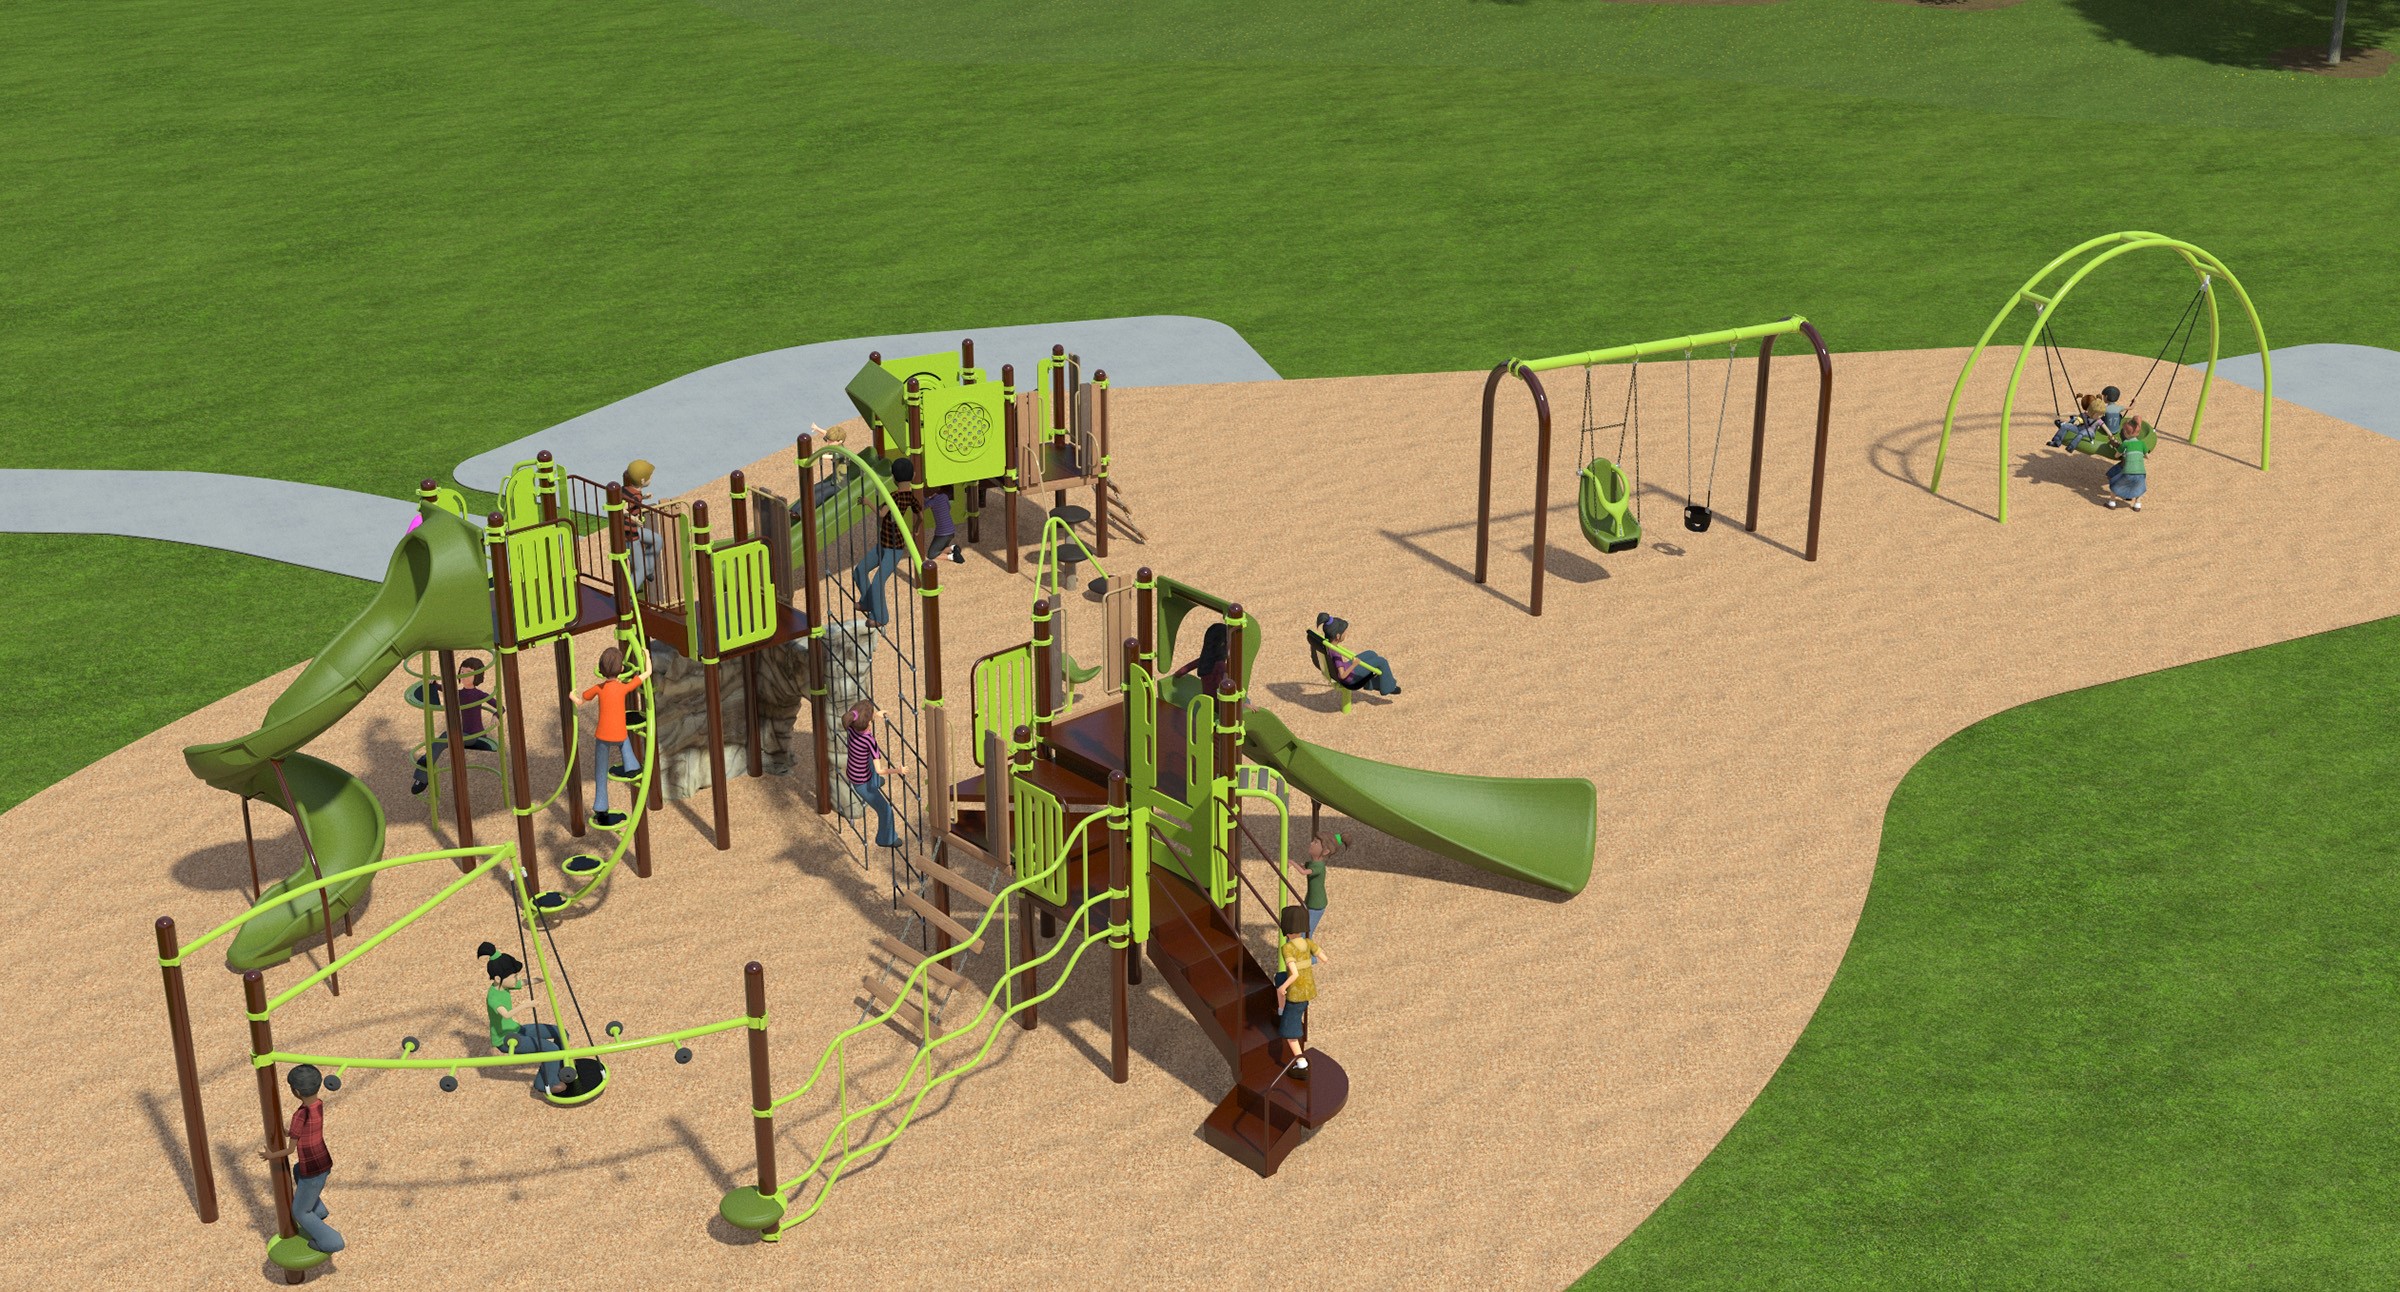 A rendering of the final playground for Spring Garden Park. From the bottom left to top right corner is a junior play structure with various features, including a slide and monkey bars. A senior play structure with various features, including a large slide, climbing options and a climbing net. A swing set with two swings (infant and accessible) and a stand-alone bucket swing set. 